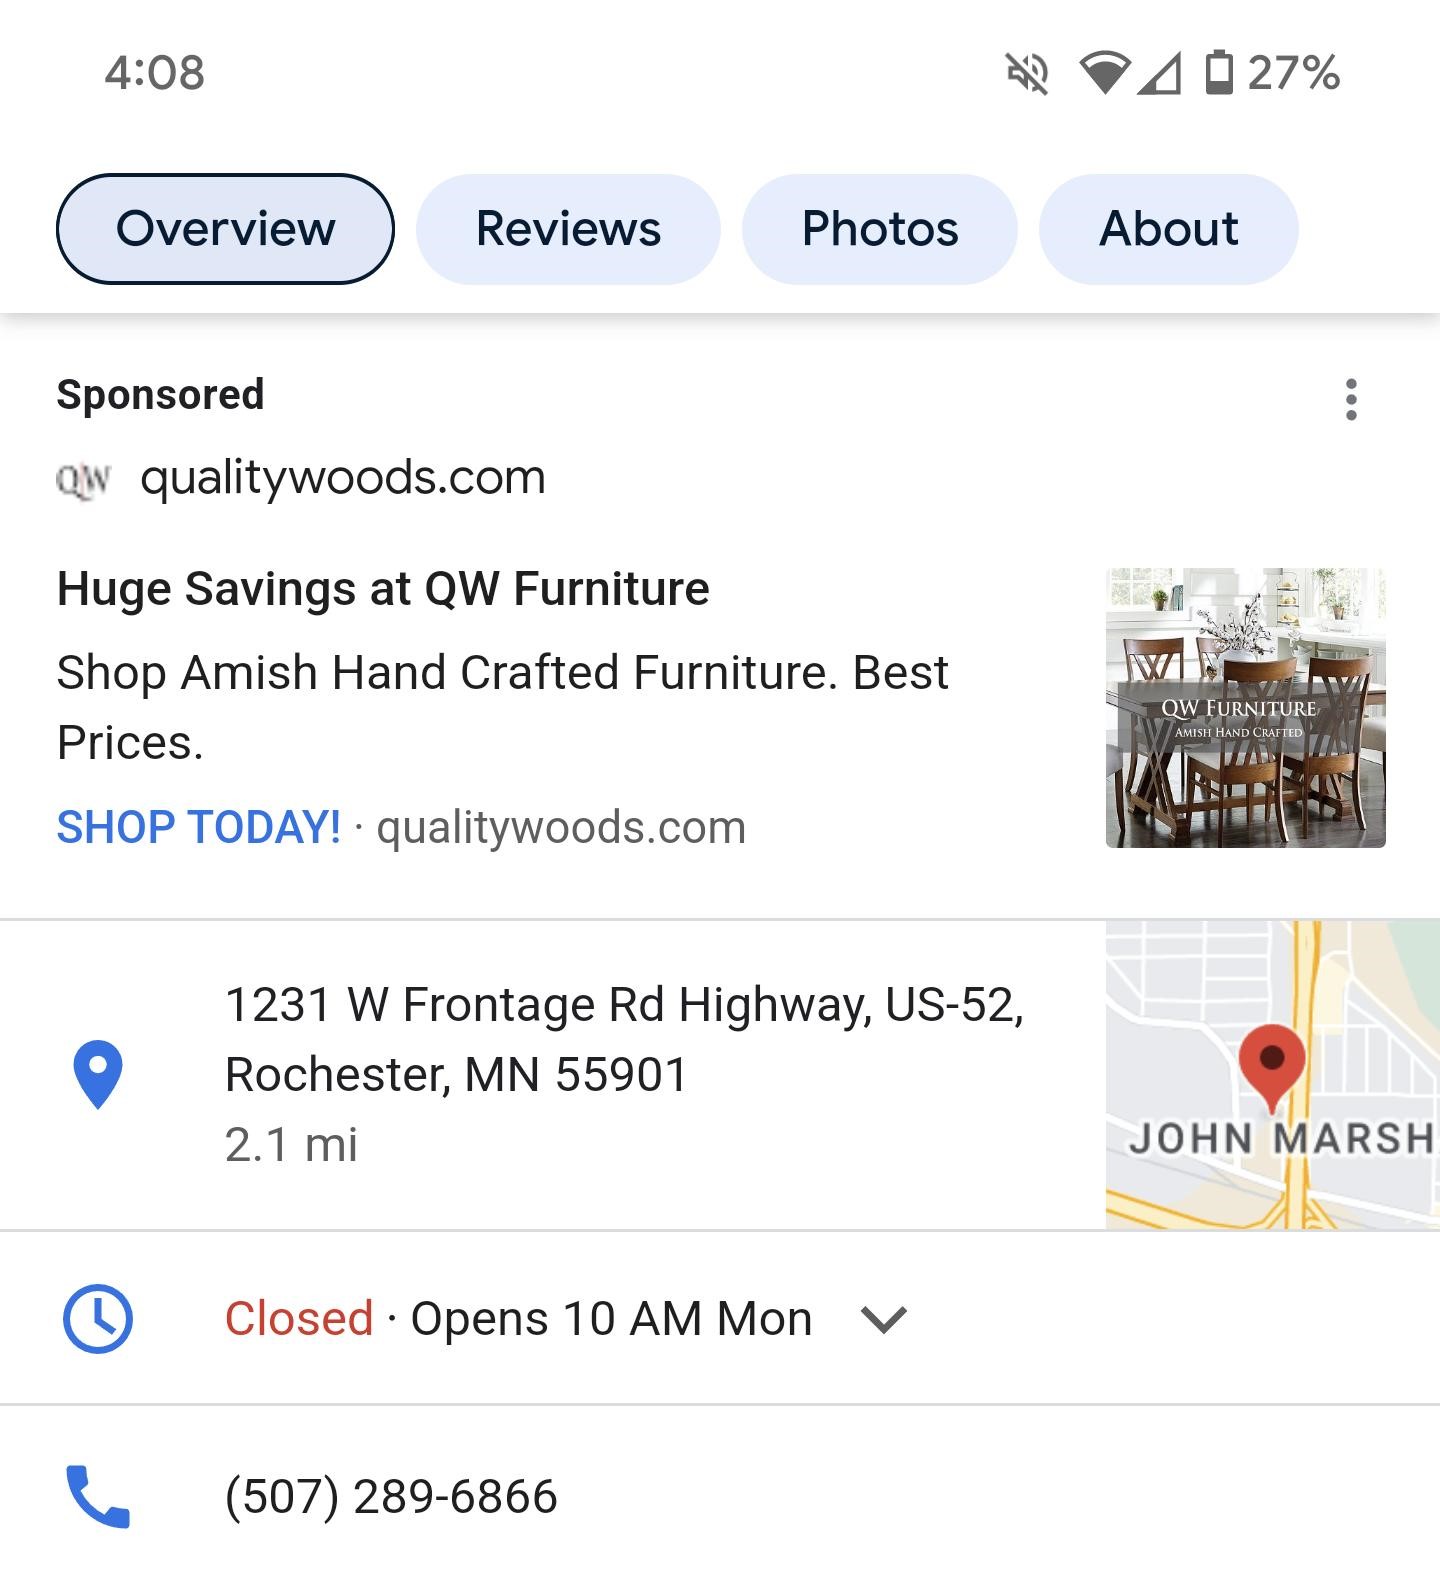 Example of location asset in Google search.